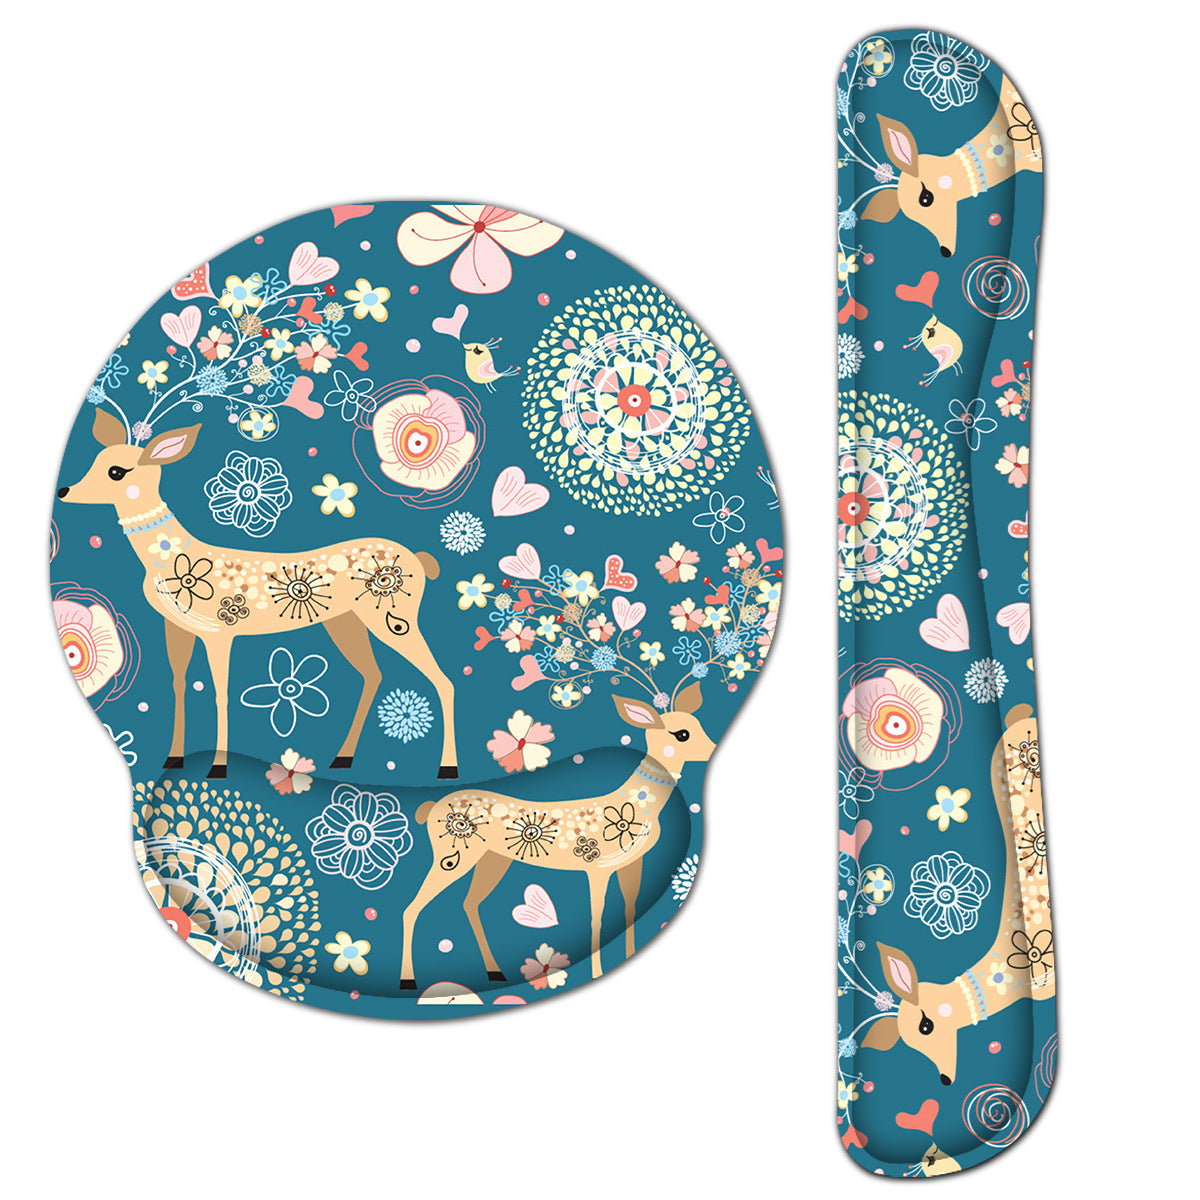 Deer Floral Girly Heart Mouse Pad with Wrist Rest Keyboard Support